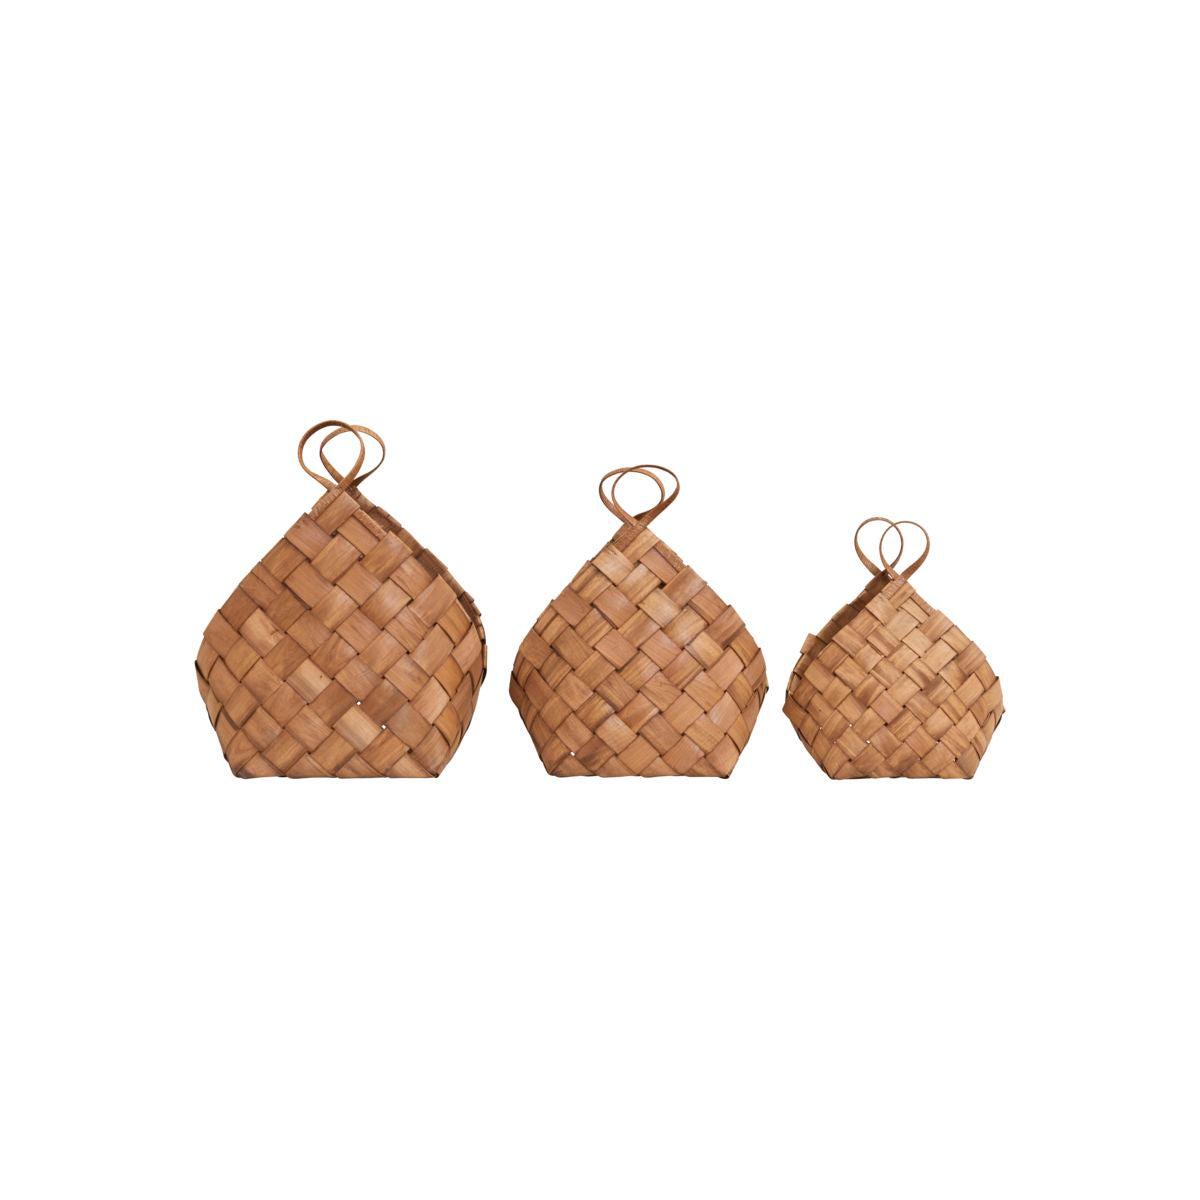 Conical Baskets